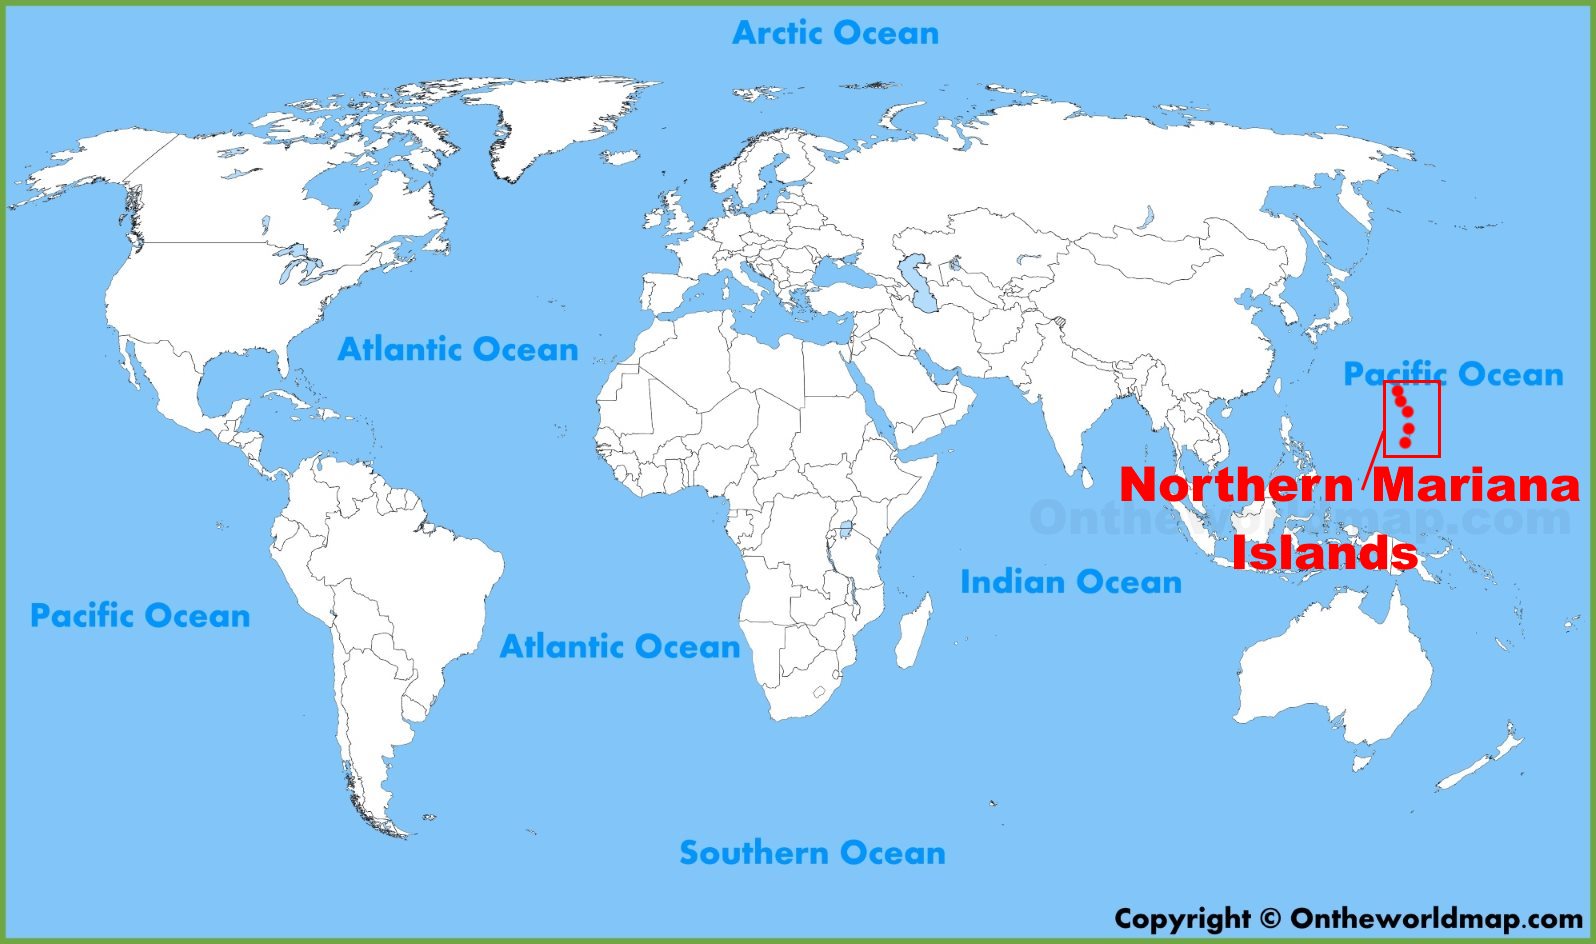 Northern Mariana Islands Location On The World Map